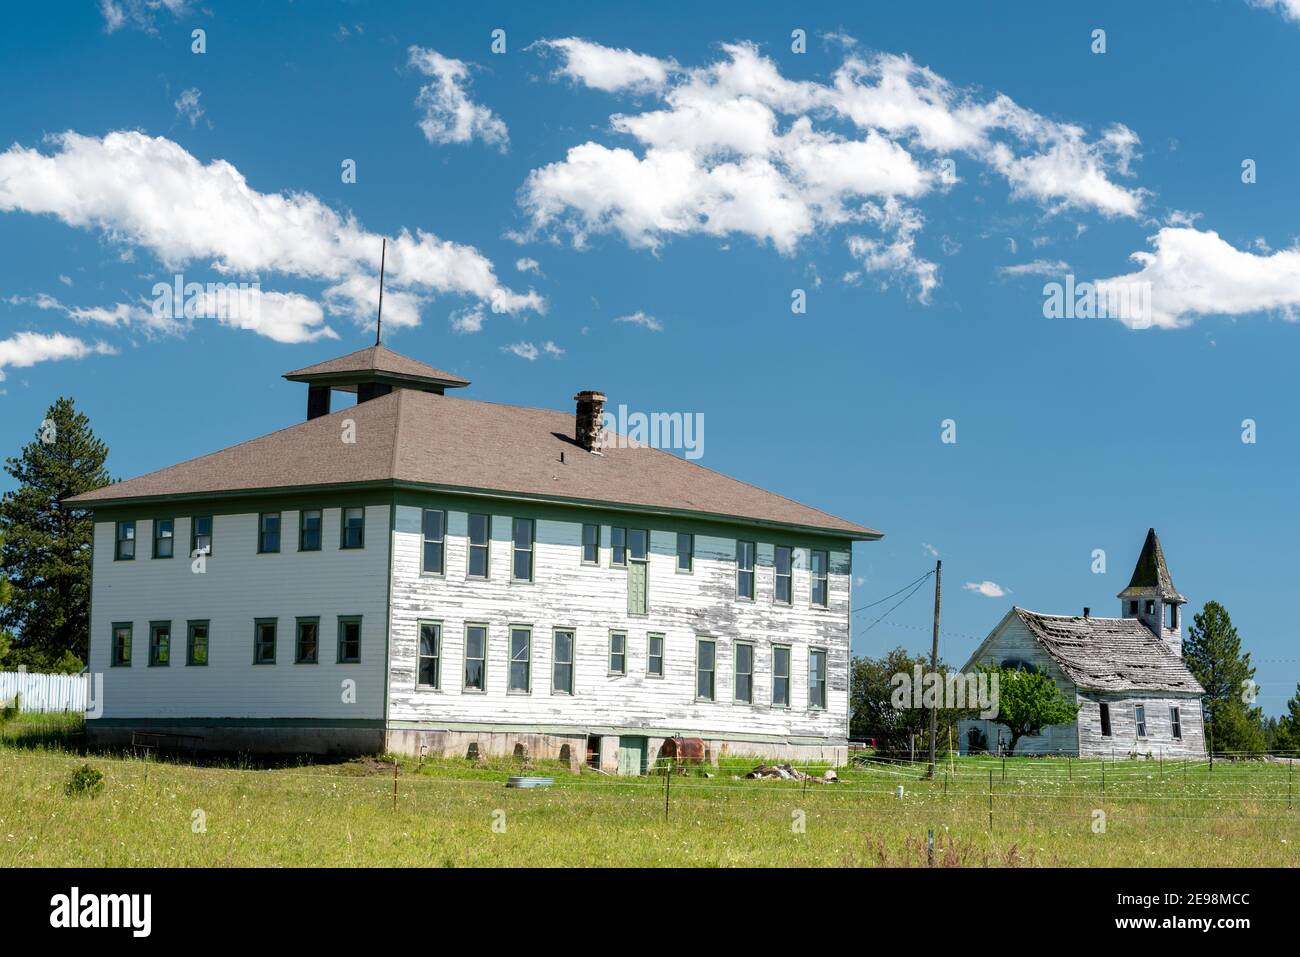 The Flora School and Methodist Church in the ghost town of Flora, Oregon. Stock Photo